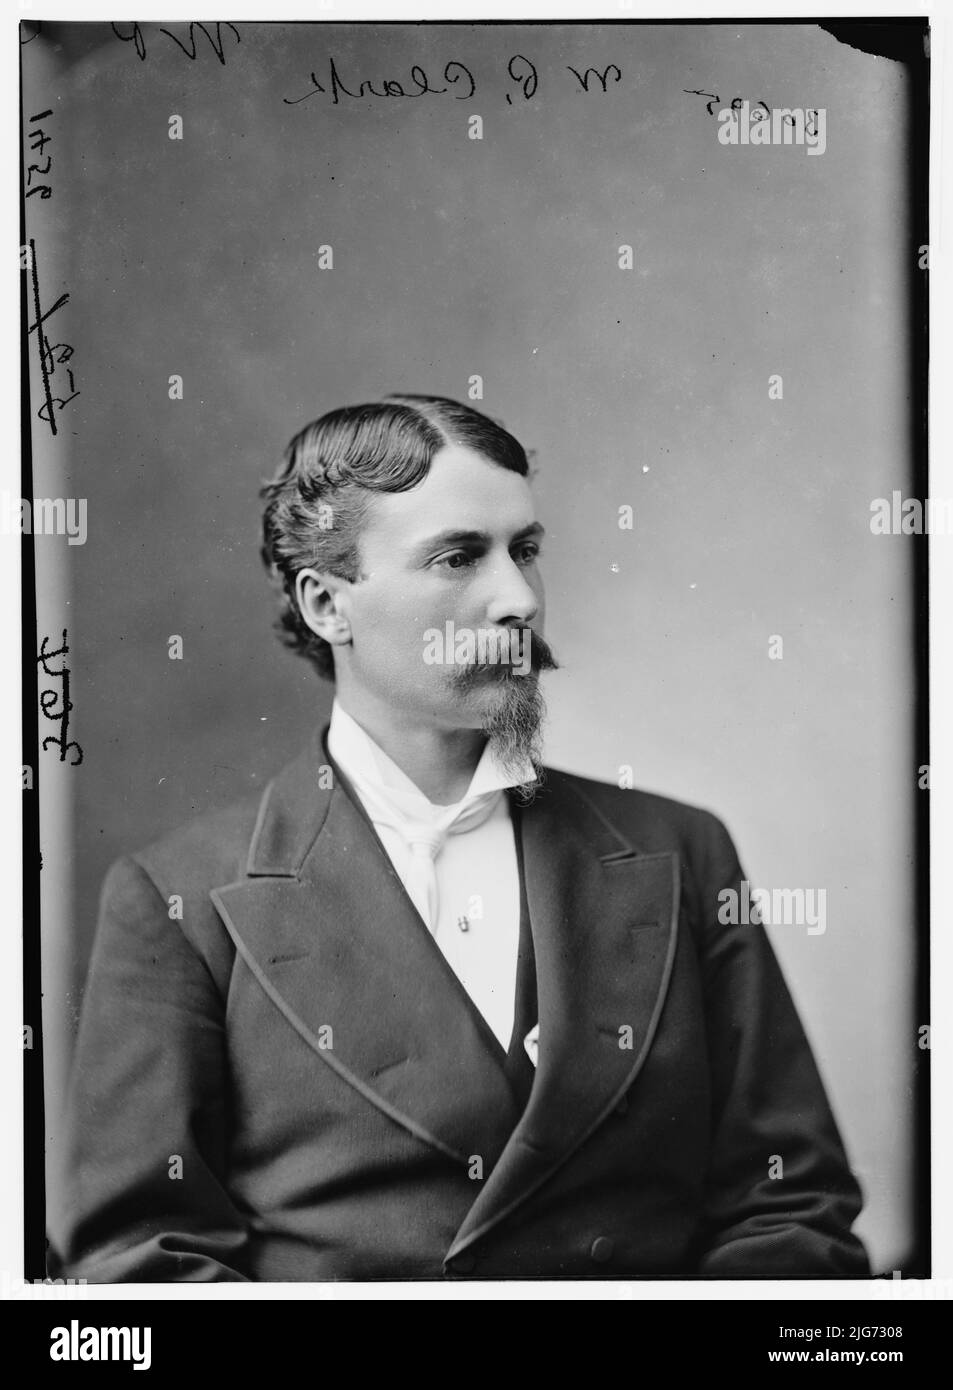 Clark, W.P., between 1870 and 1880. [Army officer during the Plains Indian Wars. Author of 'The Indian Sign Language', still a comprehensive primary source on the sign language of the Great Plains Indian tribes]. Stock Photo